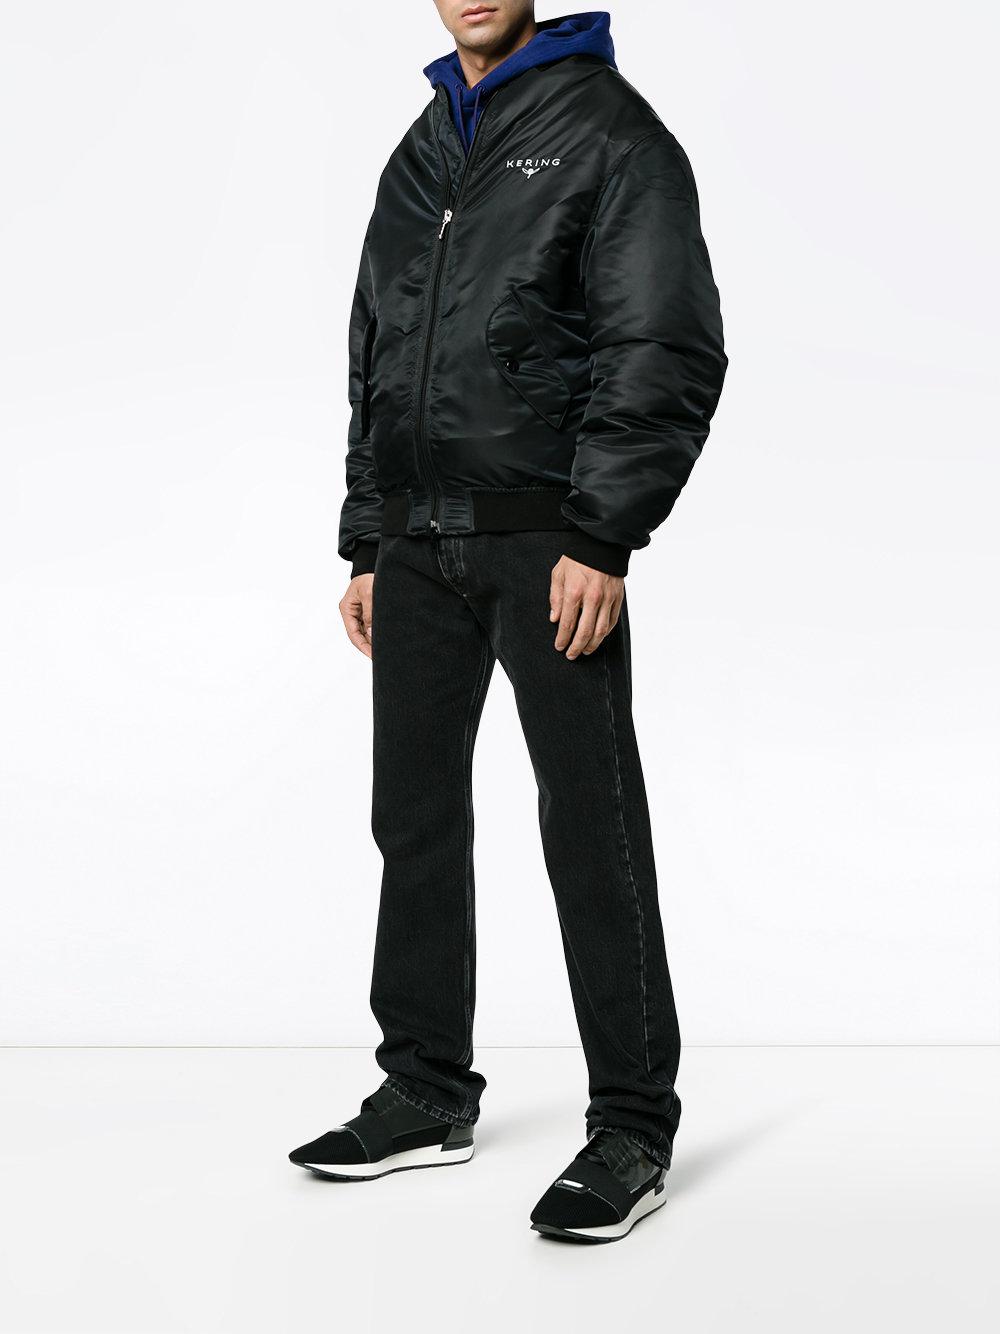 Balenciaga Synthetic Embroidered Kering Bomber Jacket in Black for 